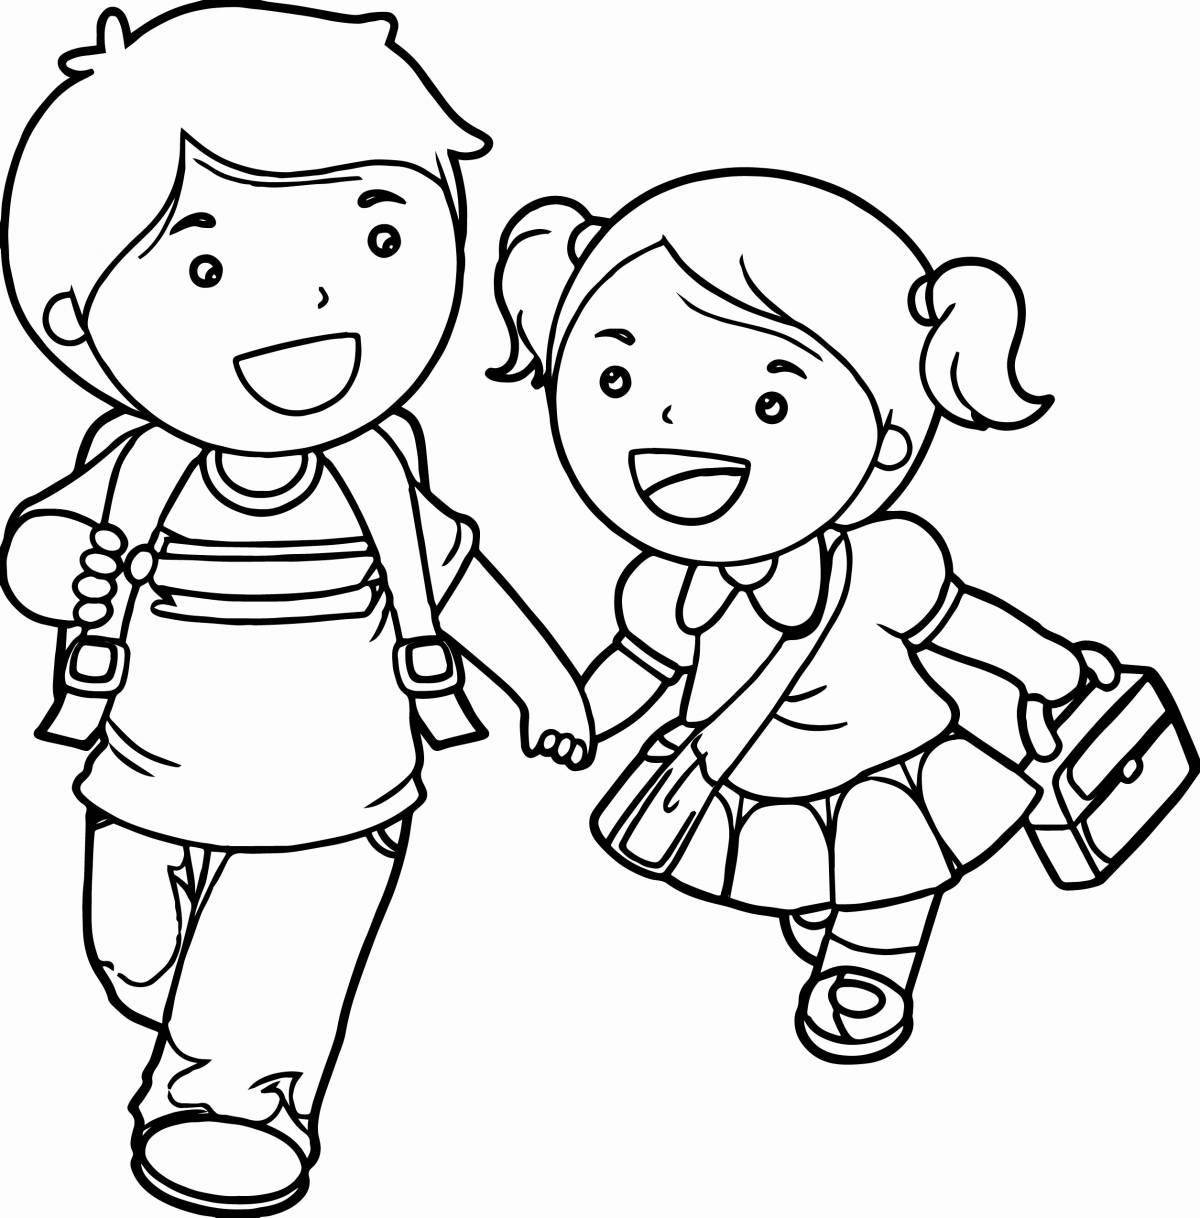 Joyful friends coloring pages for kids